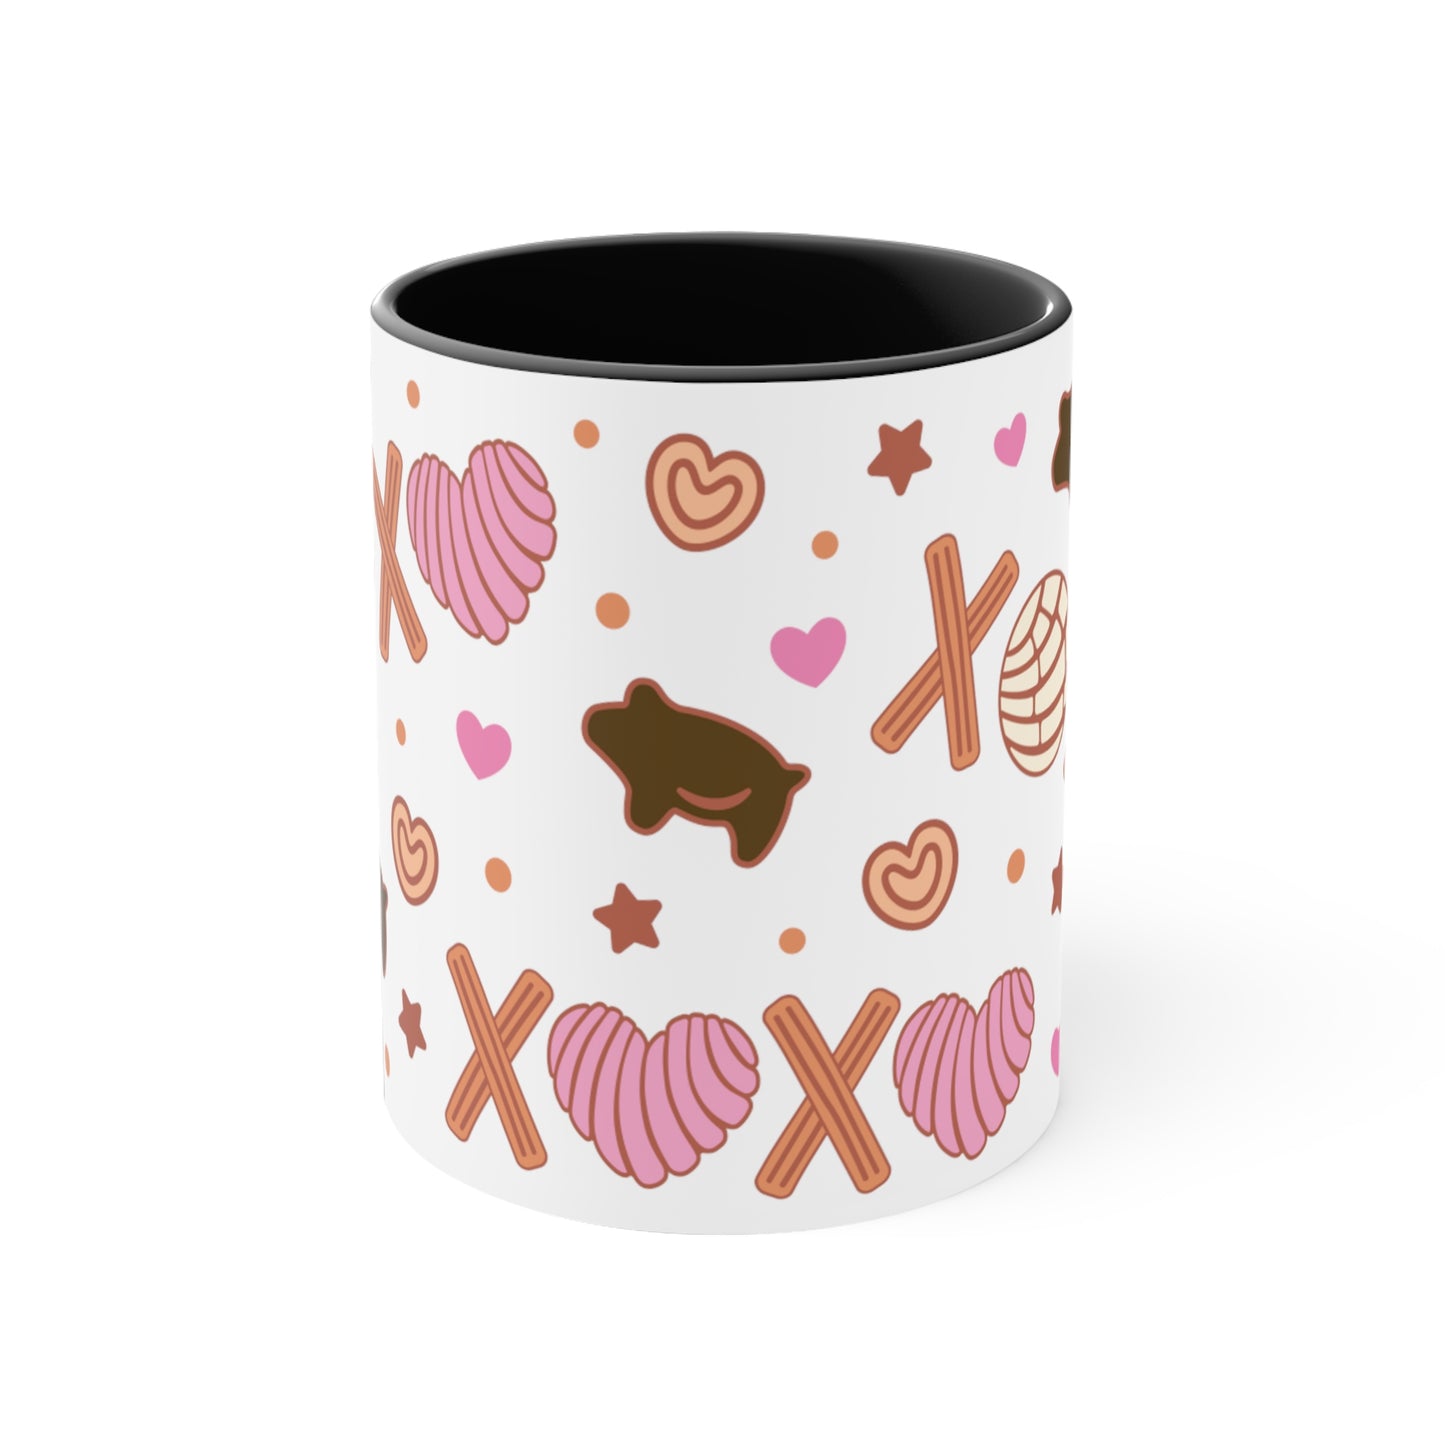 xoxo pan dulce Coffee Mug 11oz for Mexican girlfriend or concha lover. Mexican mug for her. Valentines Day gift . Concha churros y puerquito